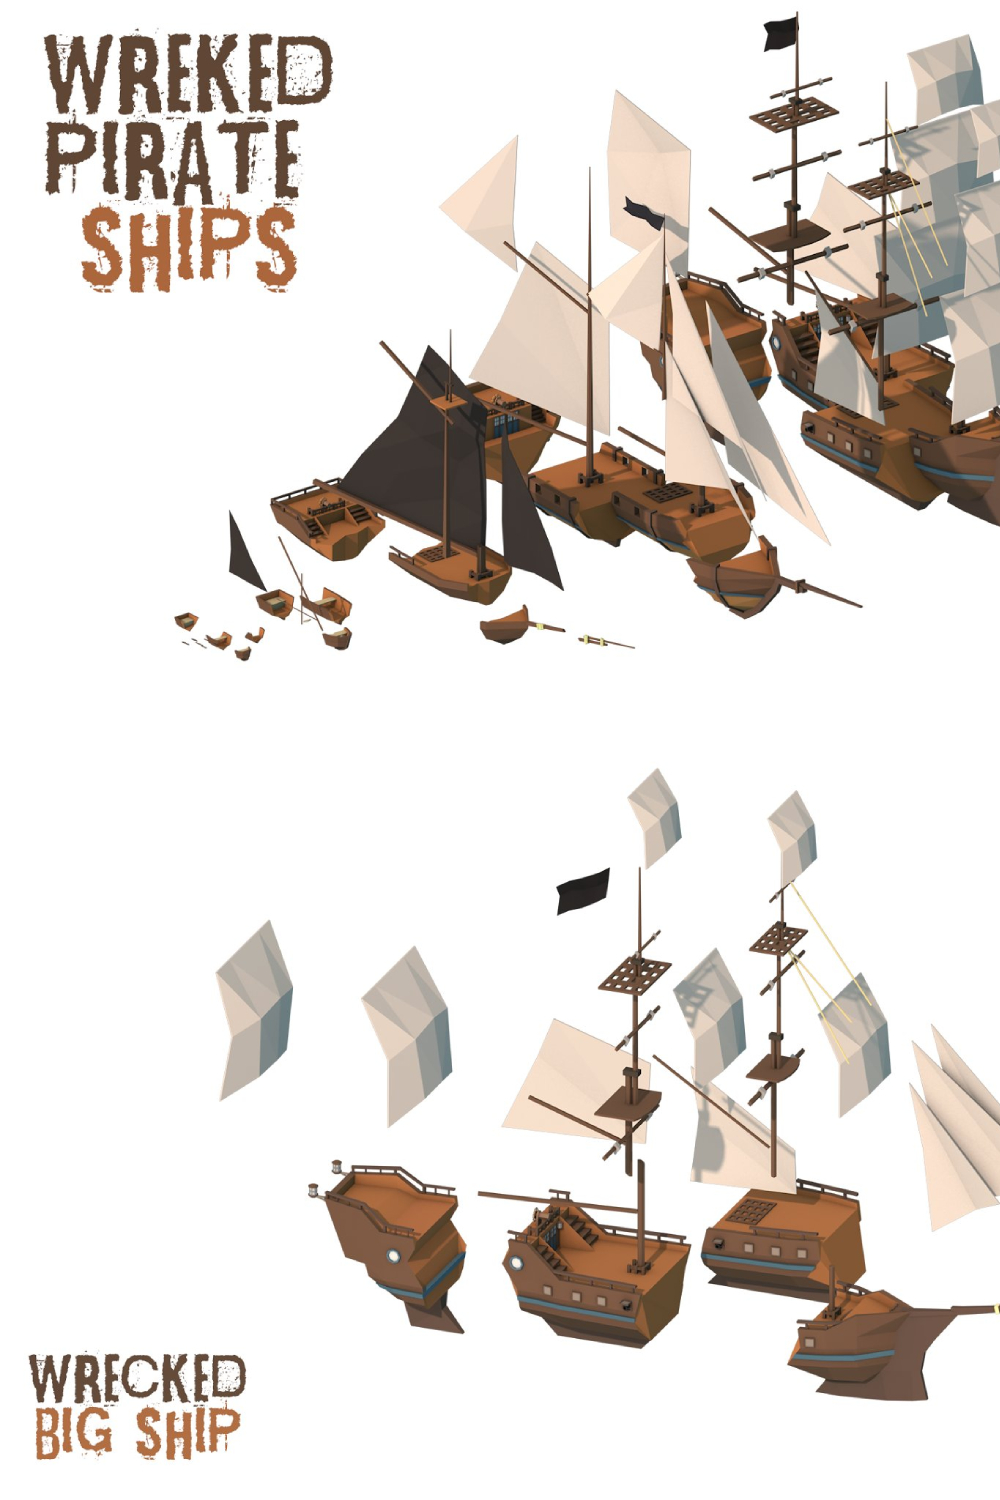 Wrecked Pirate Ships - Pinterest.